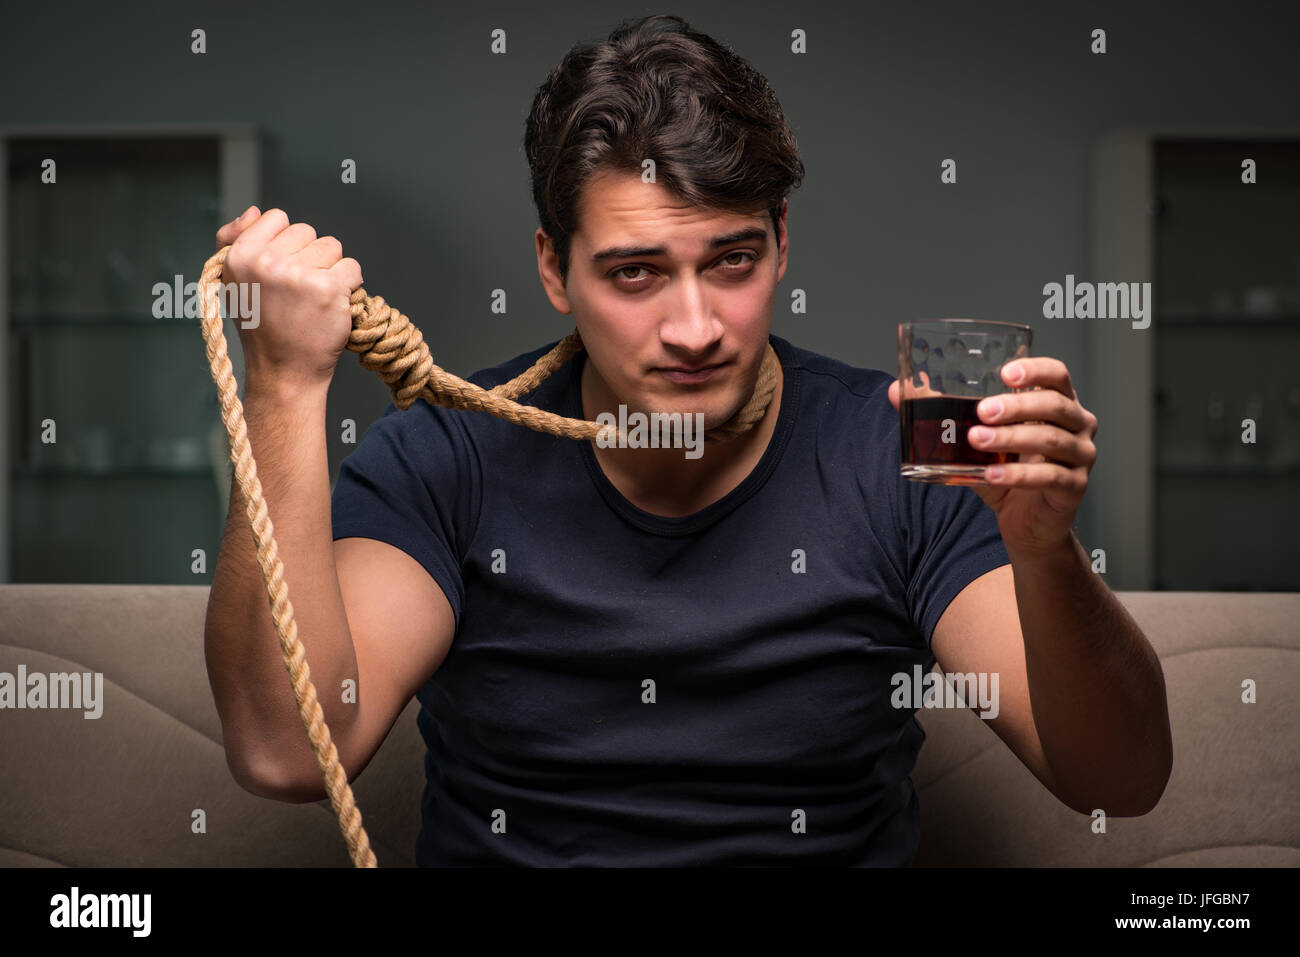 Desperate man thinking of suicide Stock Photo